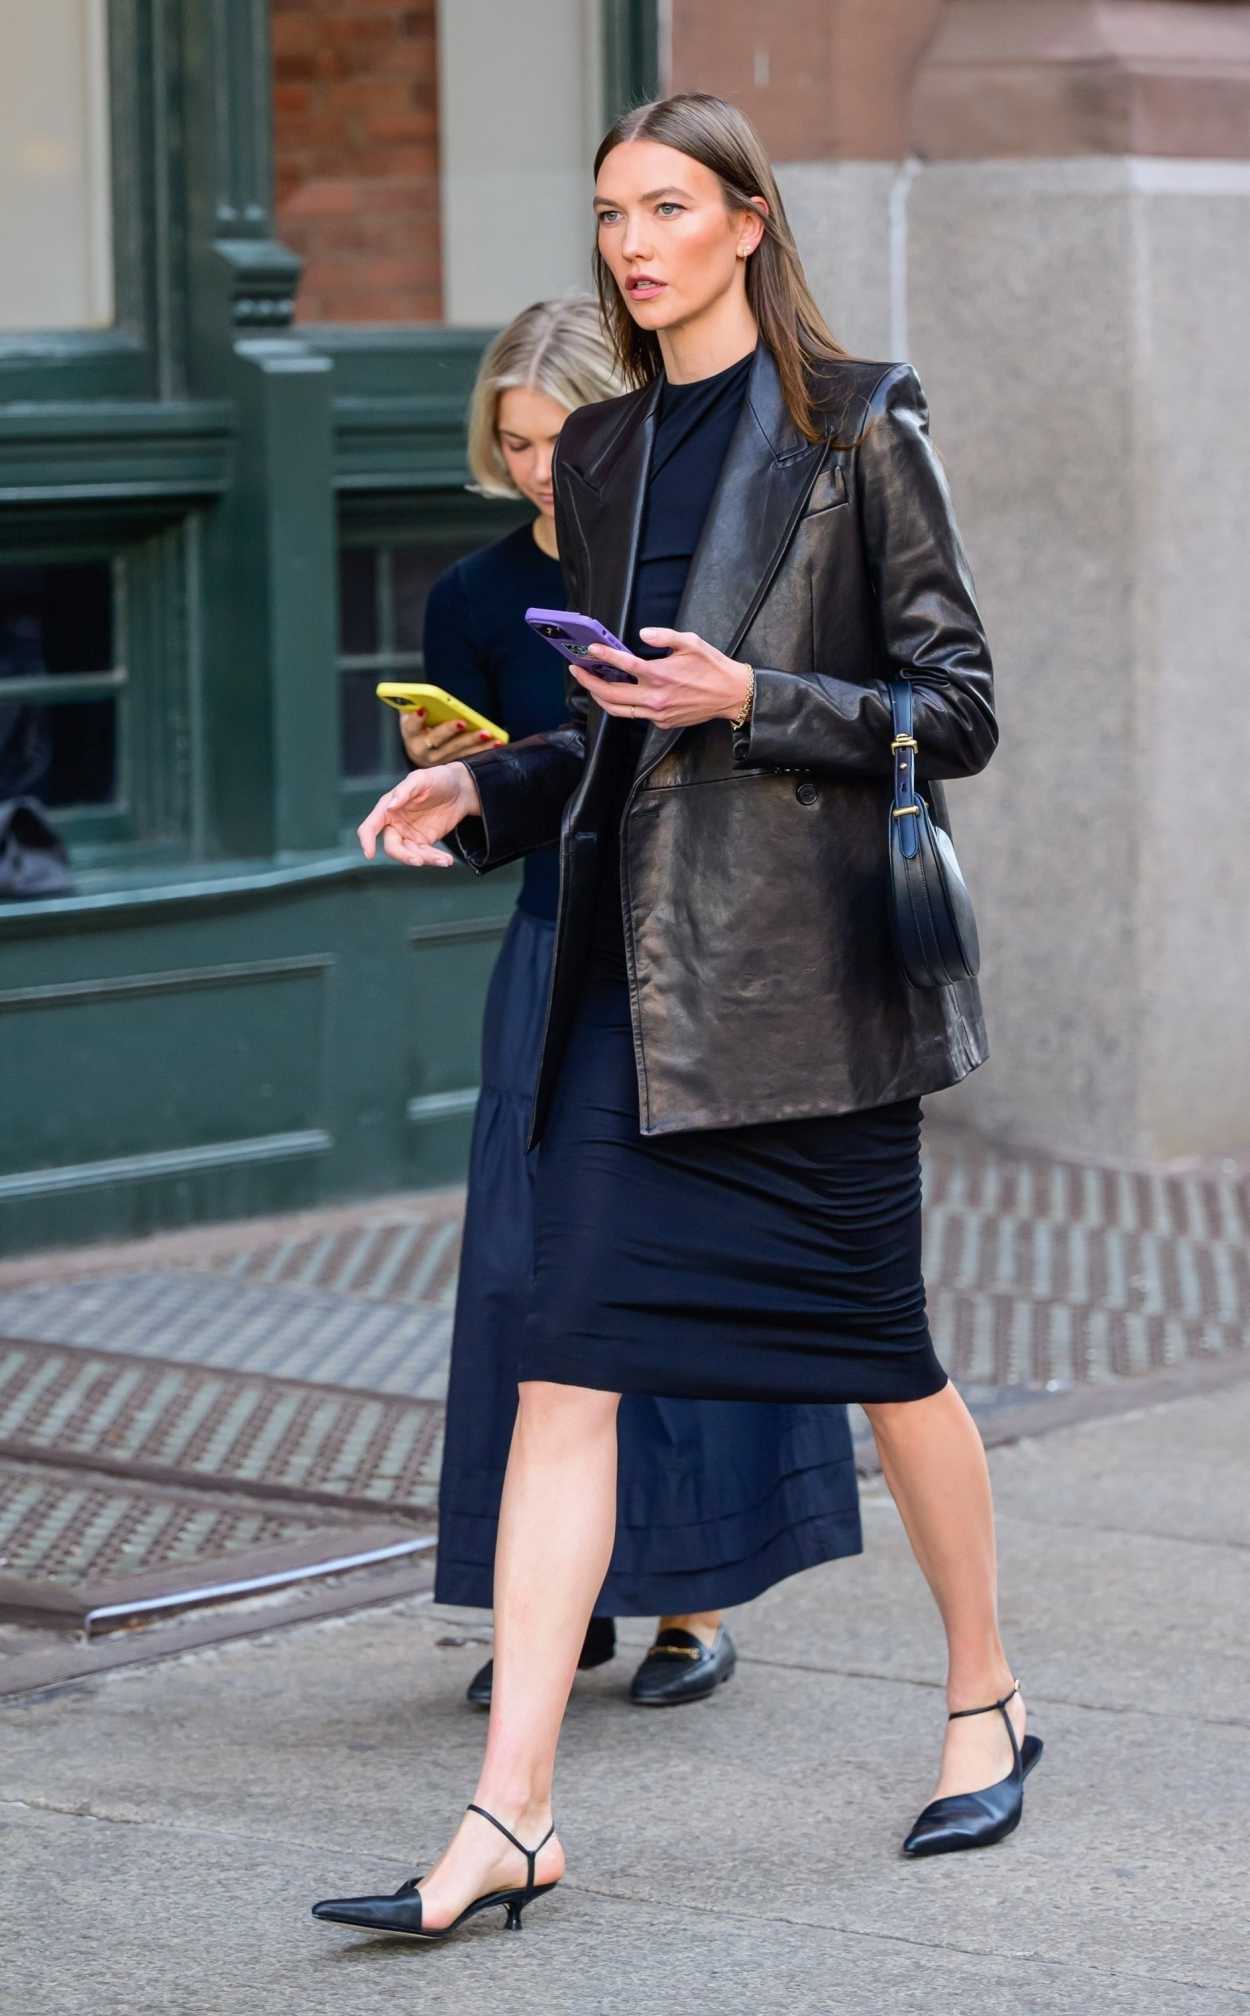 Karlie Kloss in a Black Blazer Was Seen Out with a Friend in New York ...